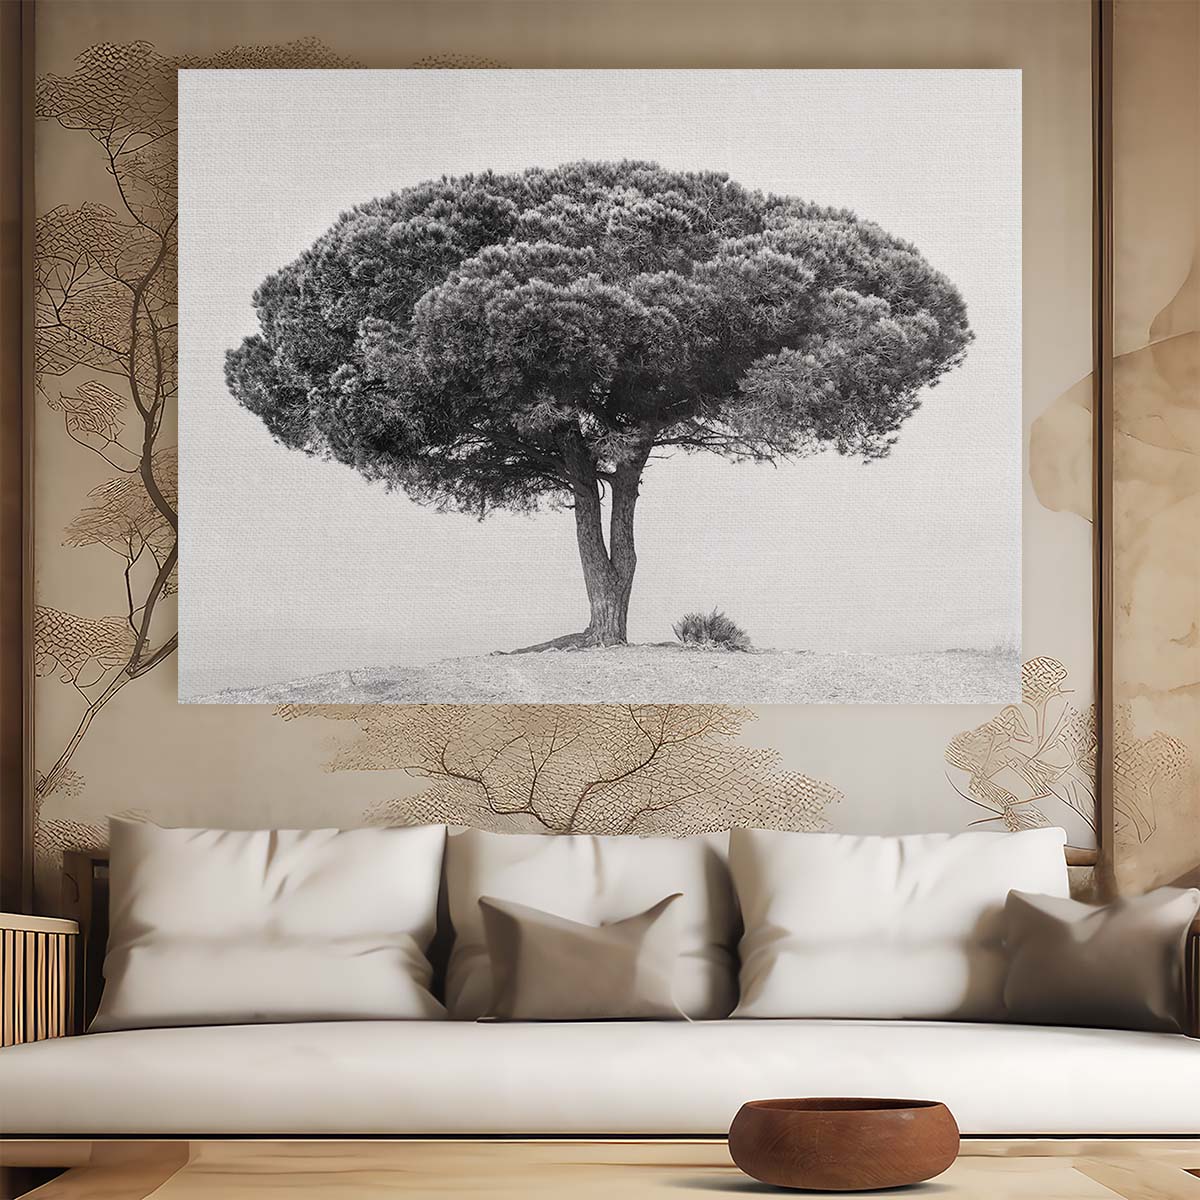 Serene Andalucian Pine Landscape Monochrome Wall Art by Luxuriance Designs. Made in USA.